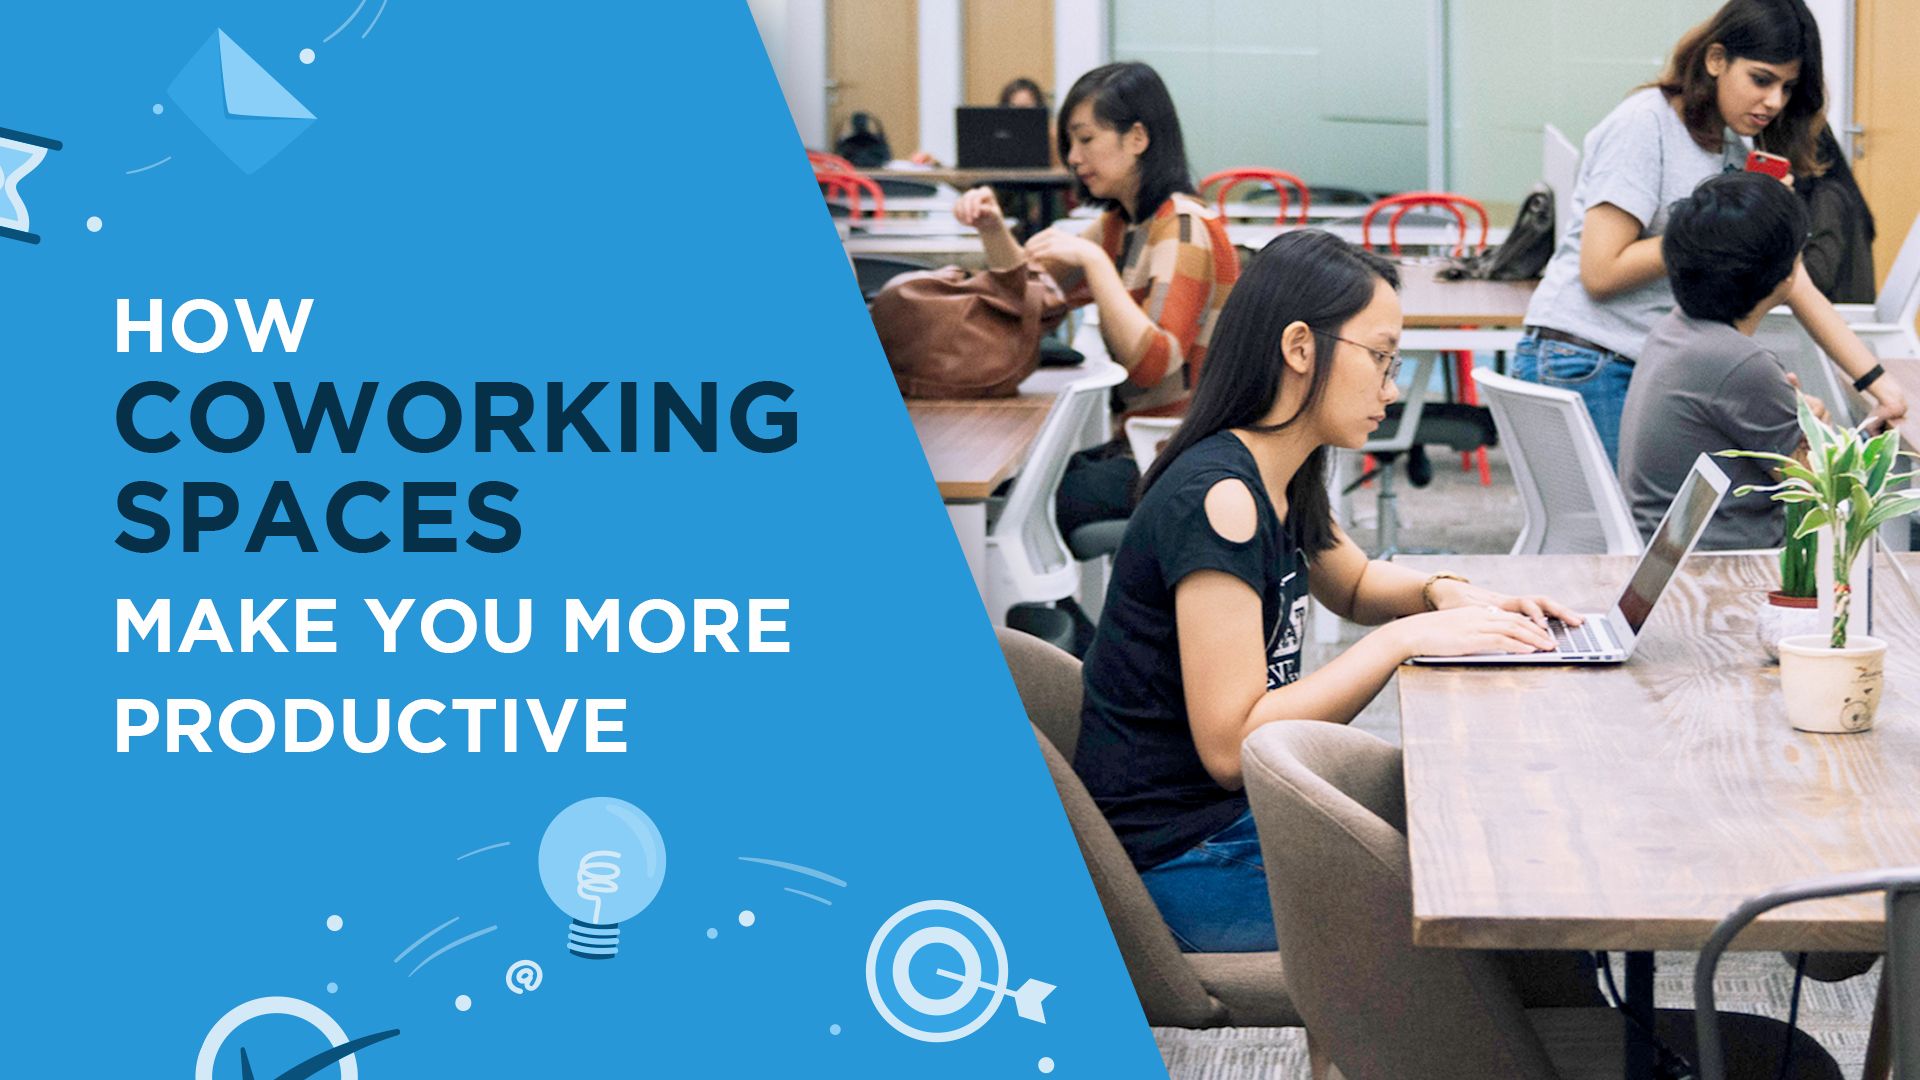 How Coworking Spaces Make You More Productive